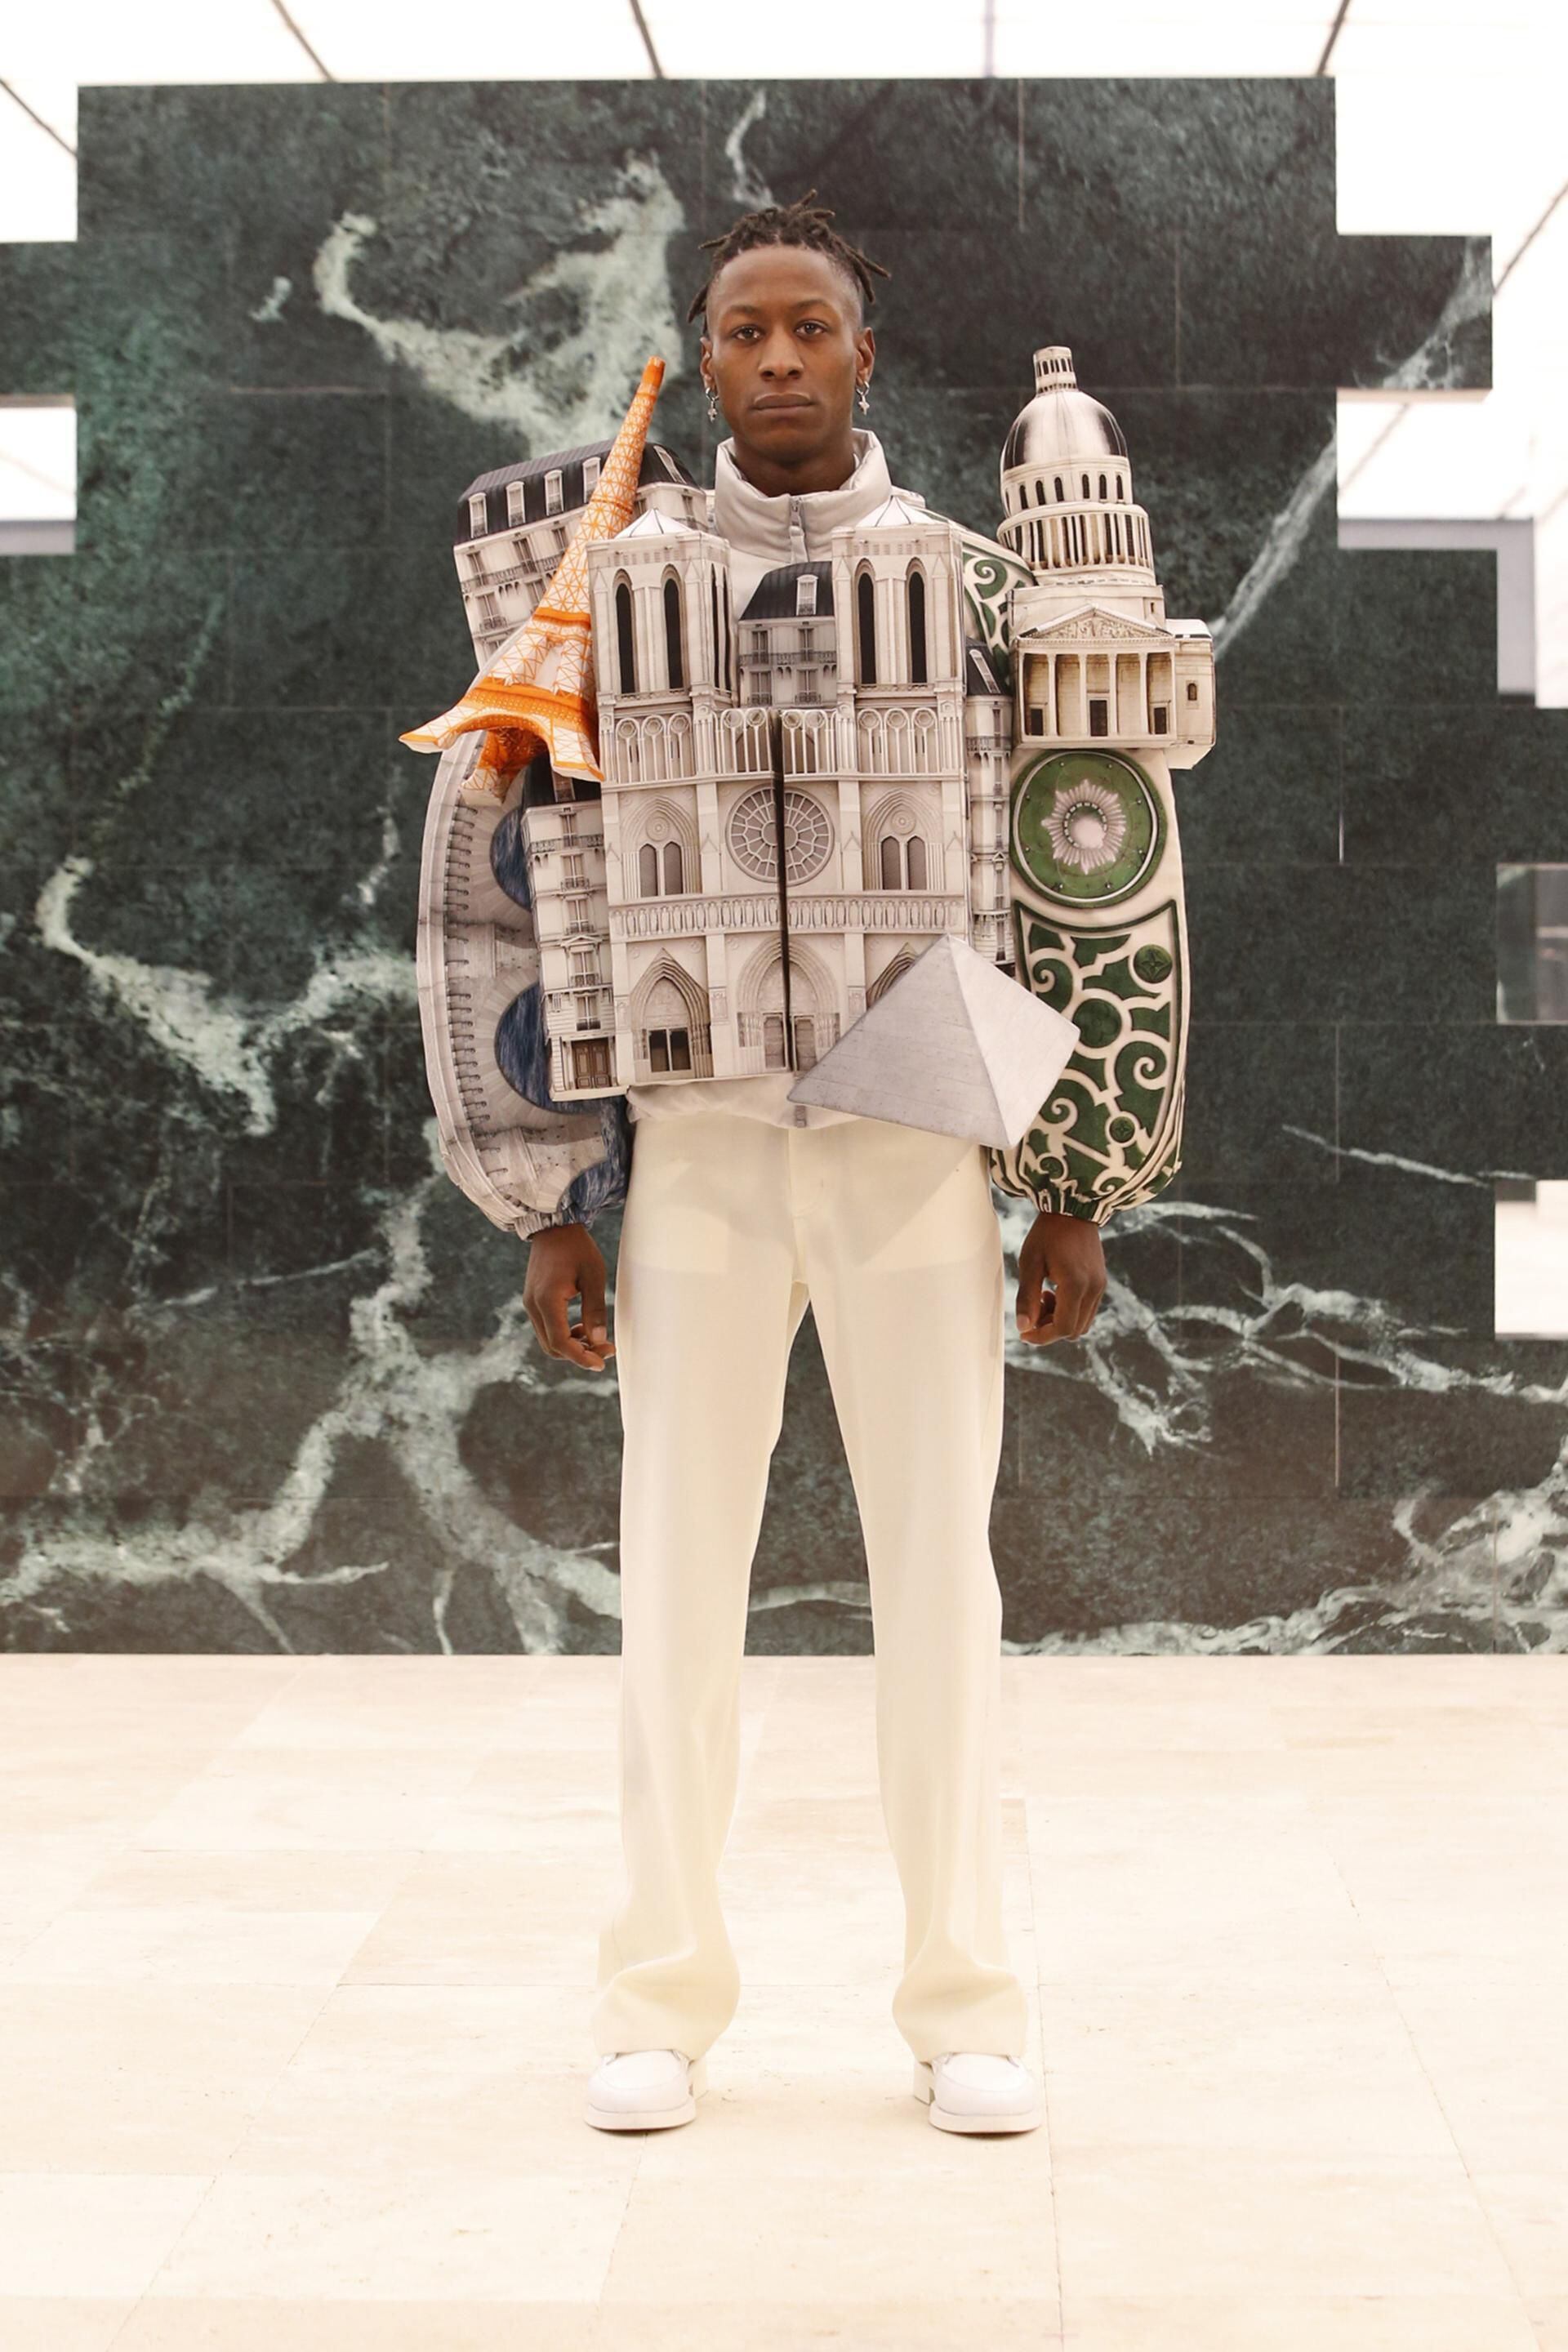 Virgil Abloh: Kente styling and other iconic designs — KENTE KINGDOM